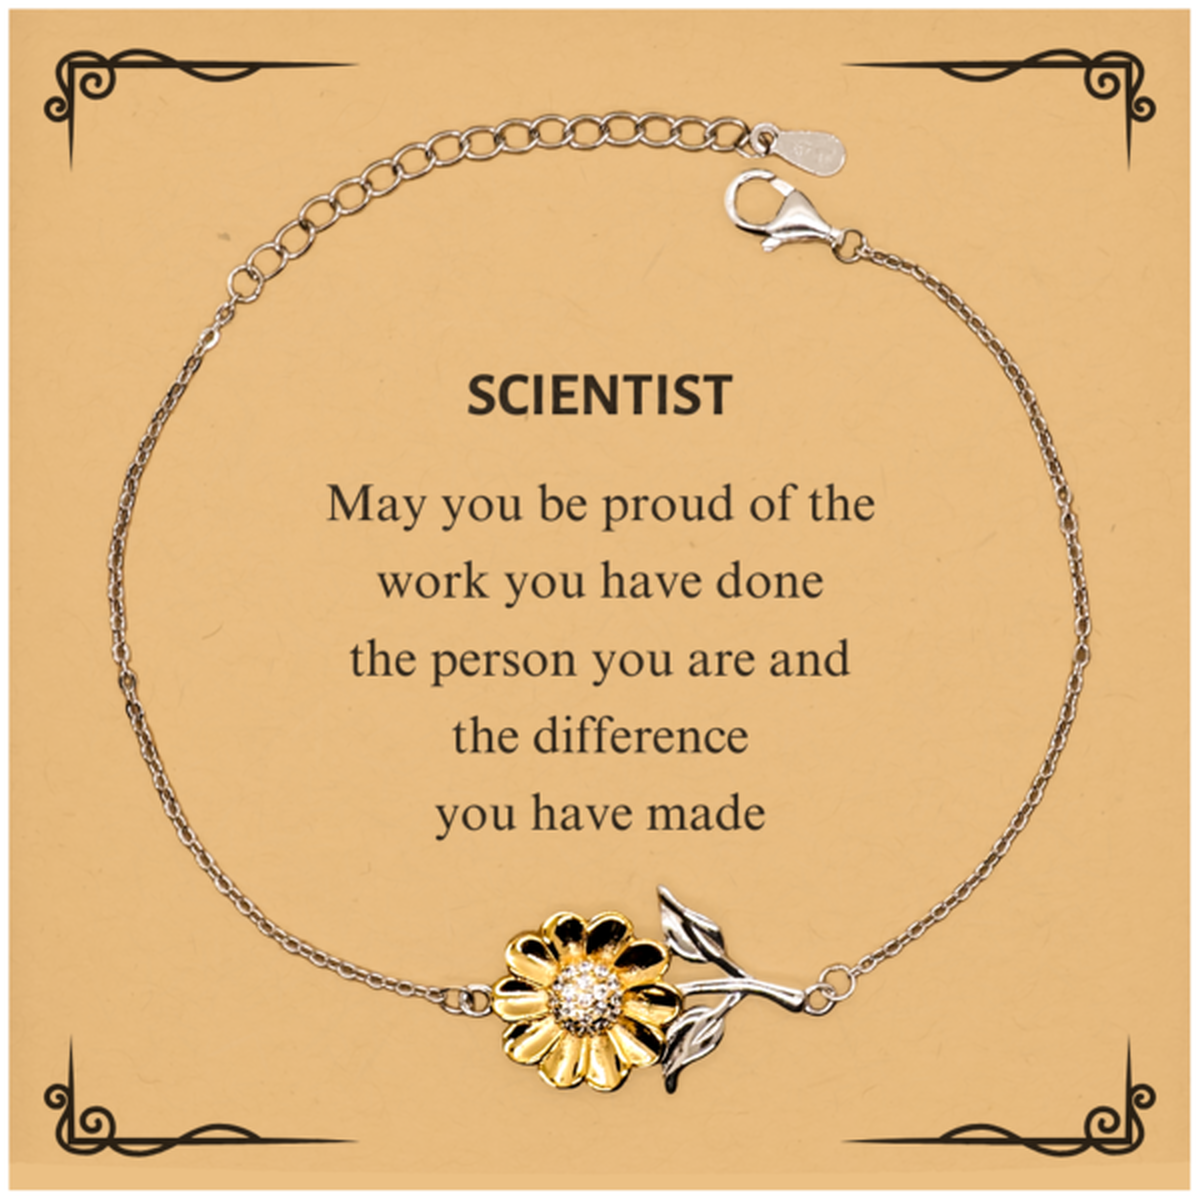 Scientist May you be proud of the work you have done, Retirement Scientist Sunflower Bracelet for Colleague Appreciation Gifts Amazing for Scientist